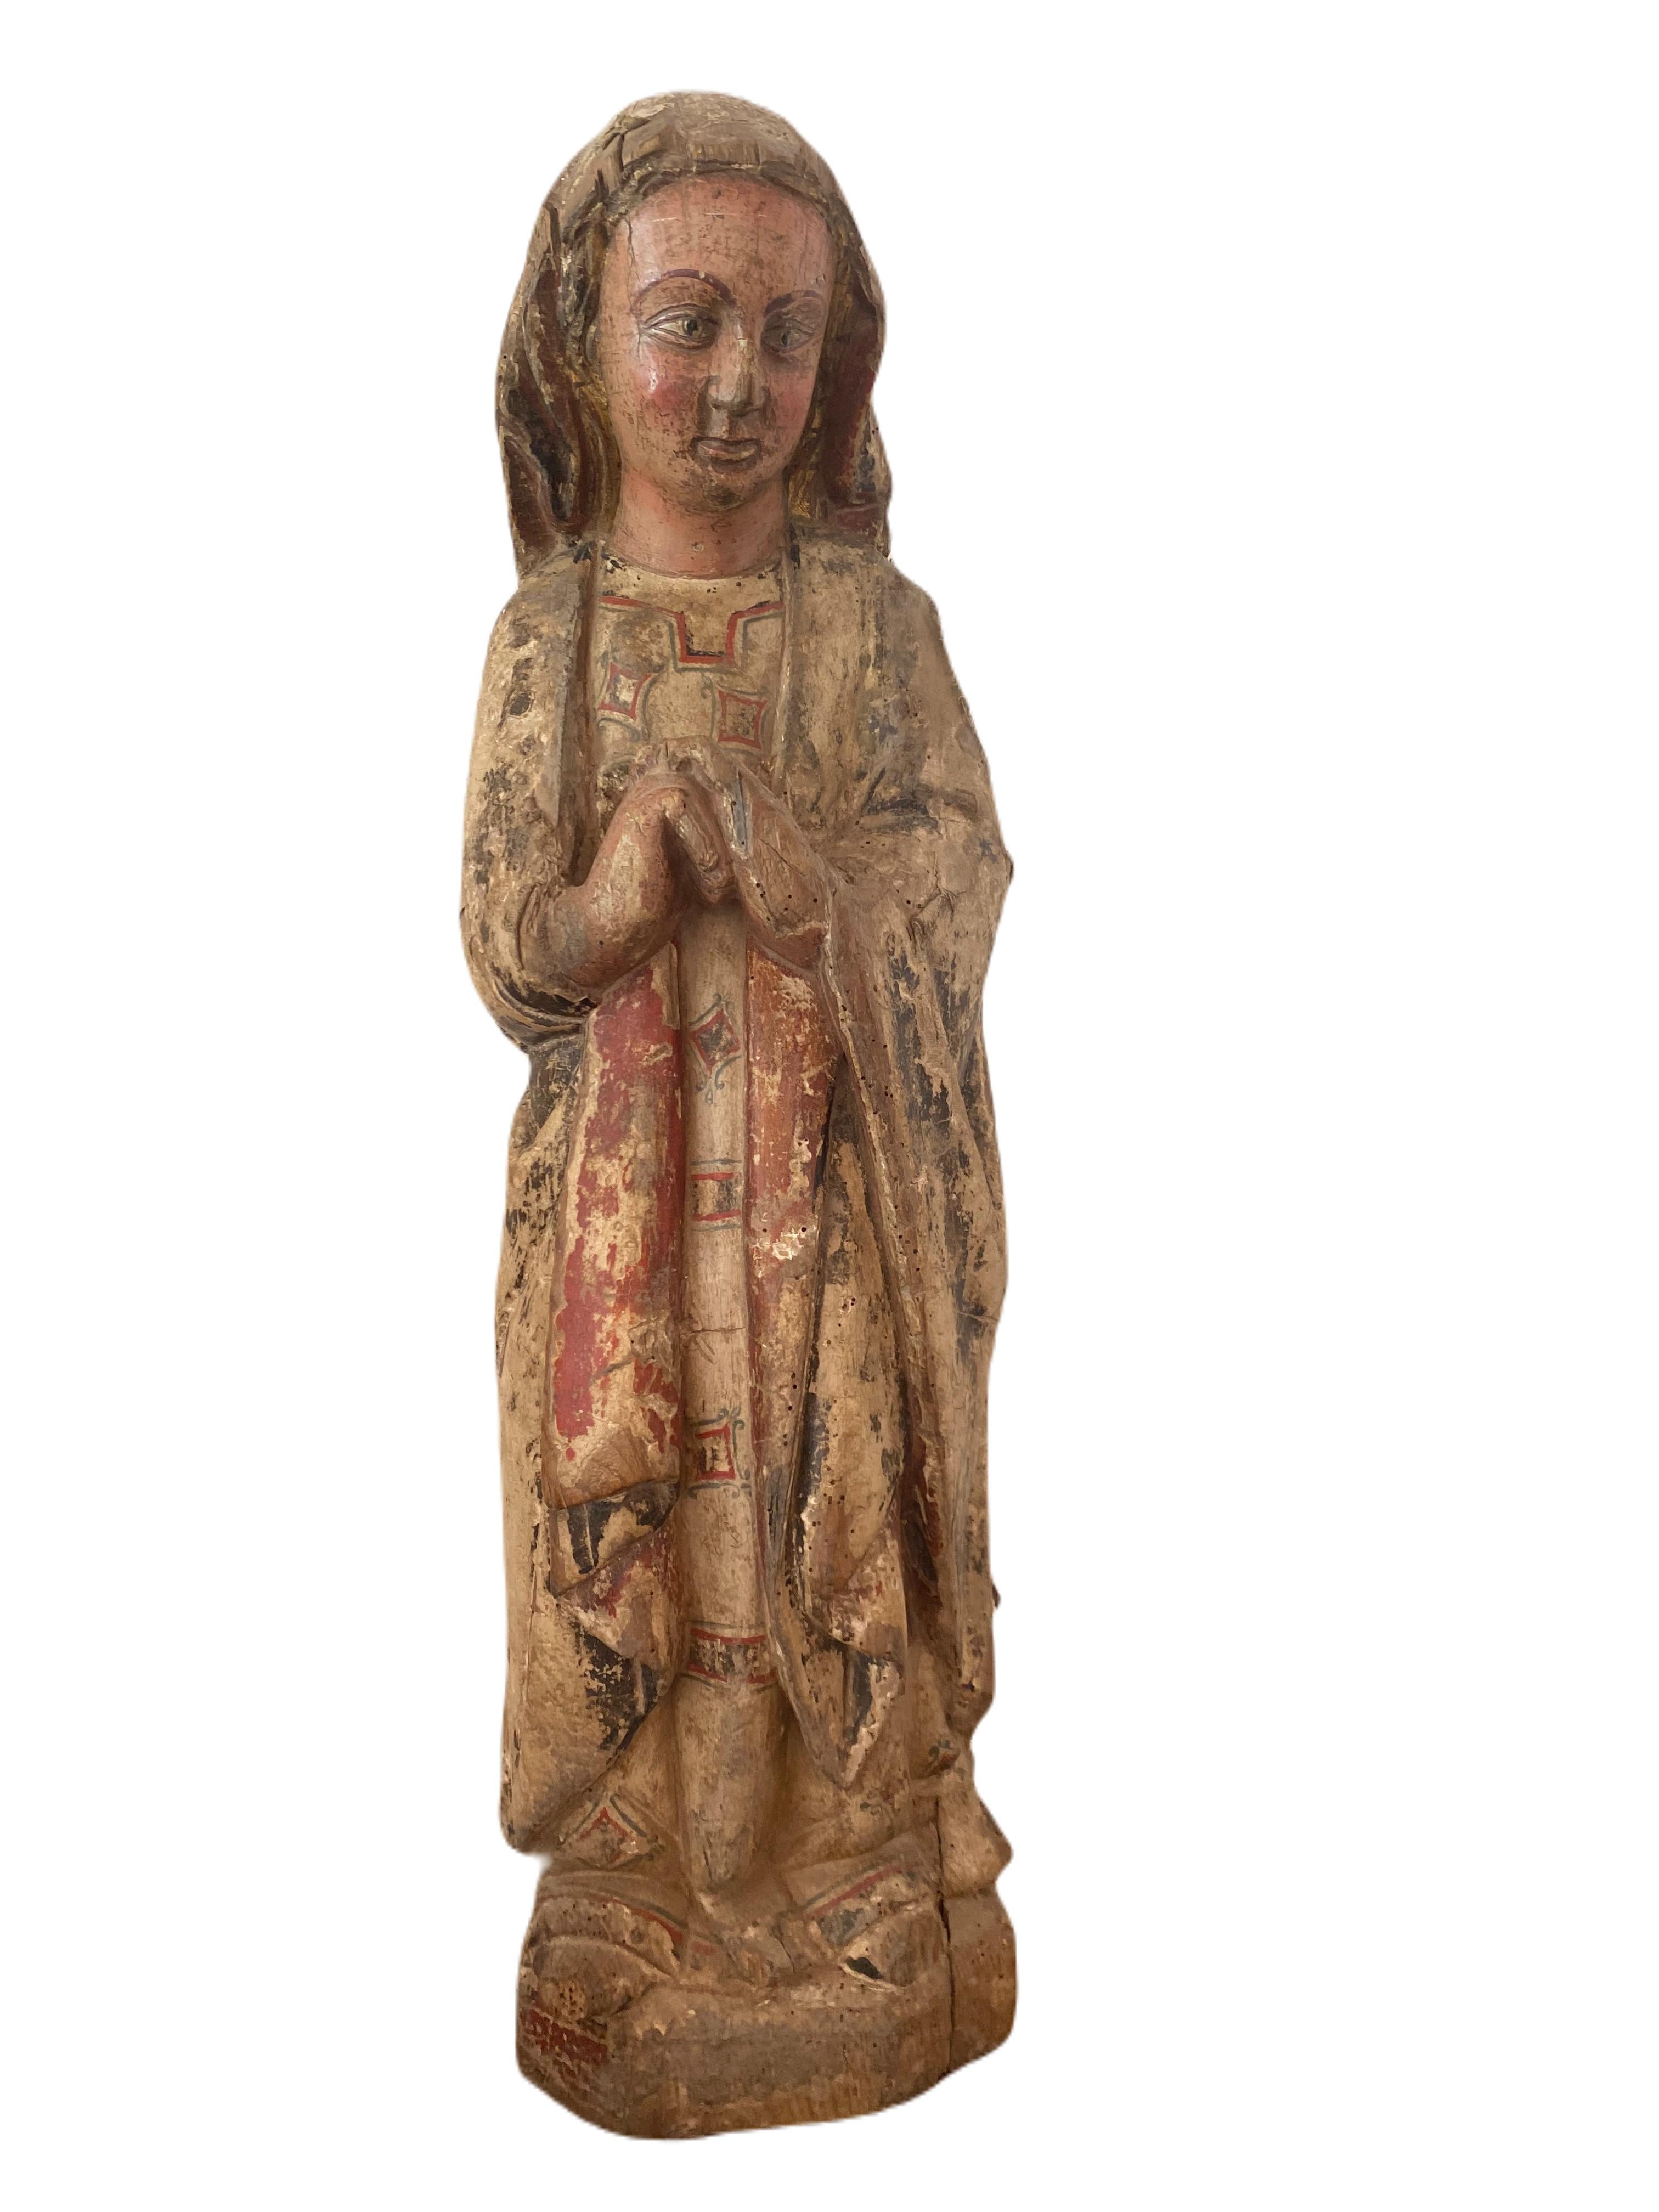 Unknown Figurative Sculpture - Polychrome Virgin of the Annunciation - Catalonia